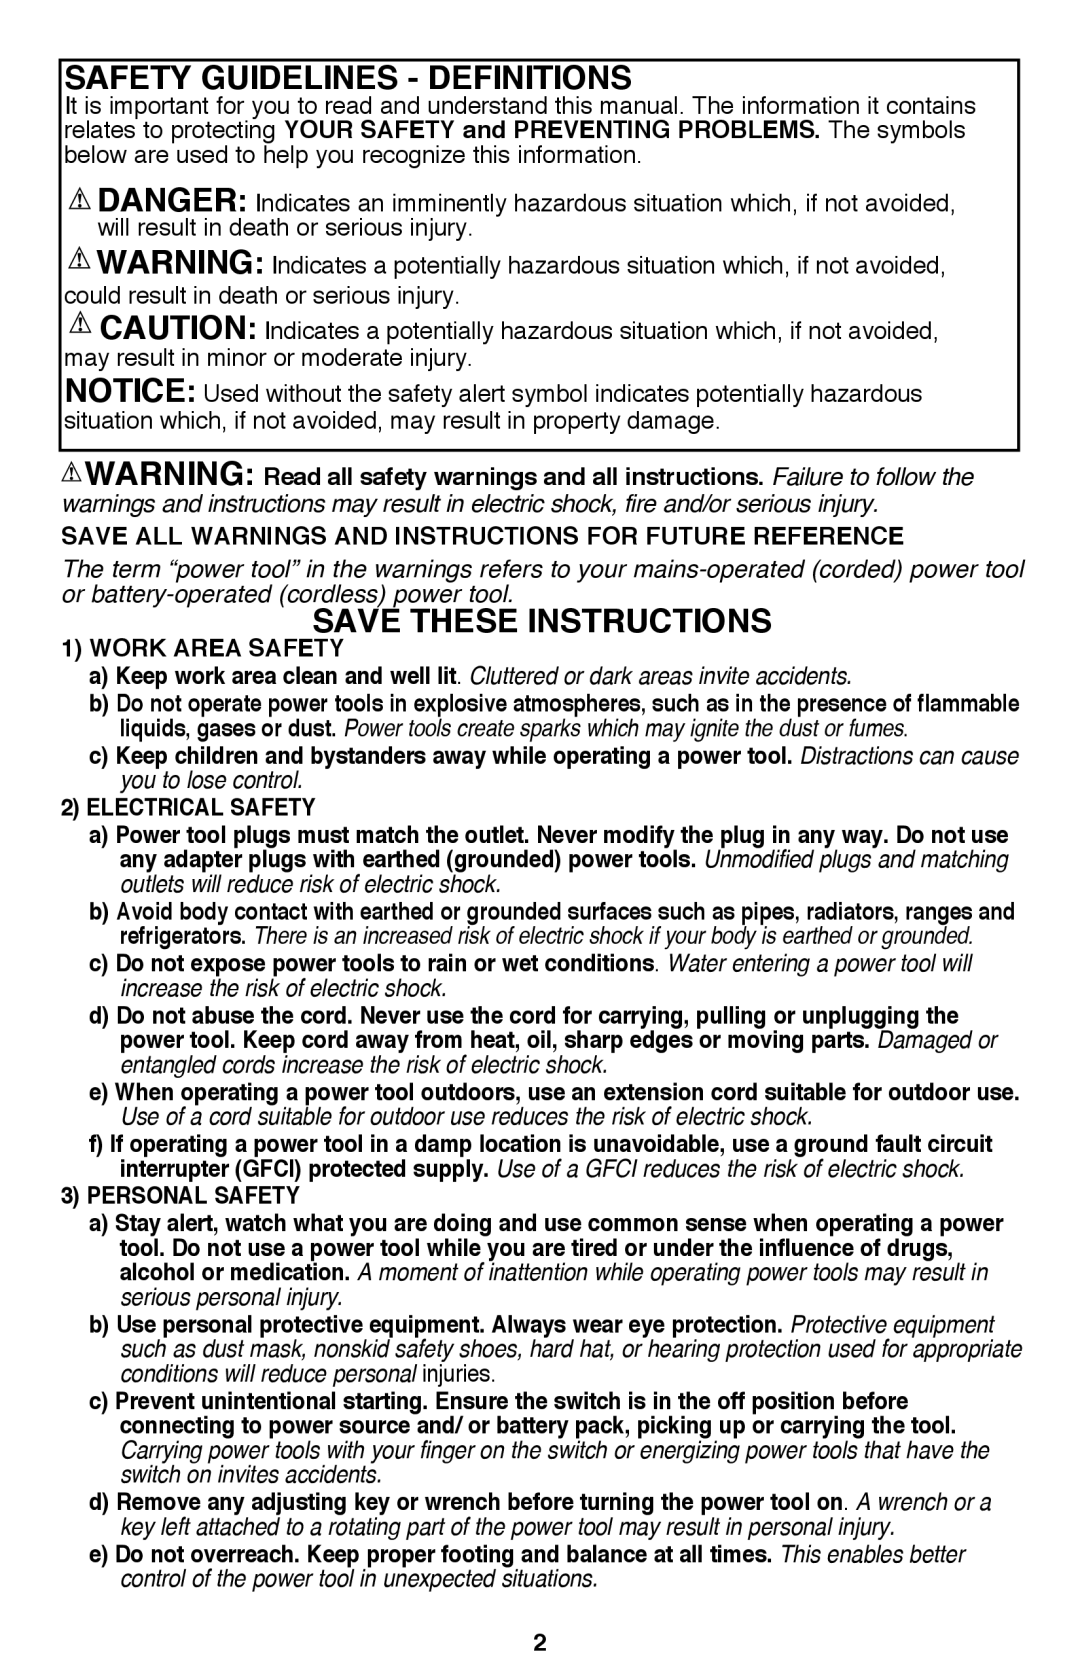 Black & Decker PSL12 instruction manual Safety Guidelines - Definitions, Save these instructions 